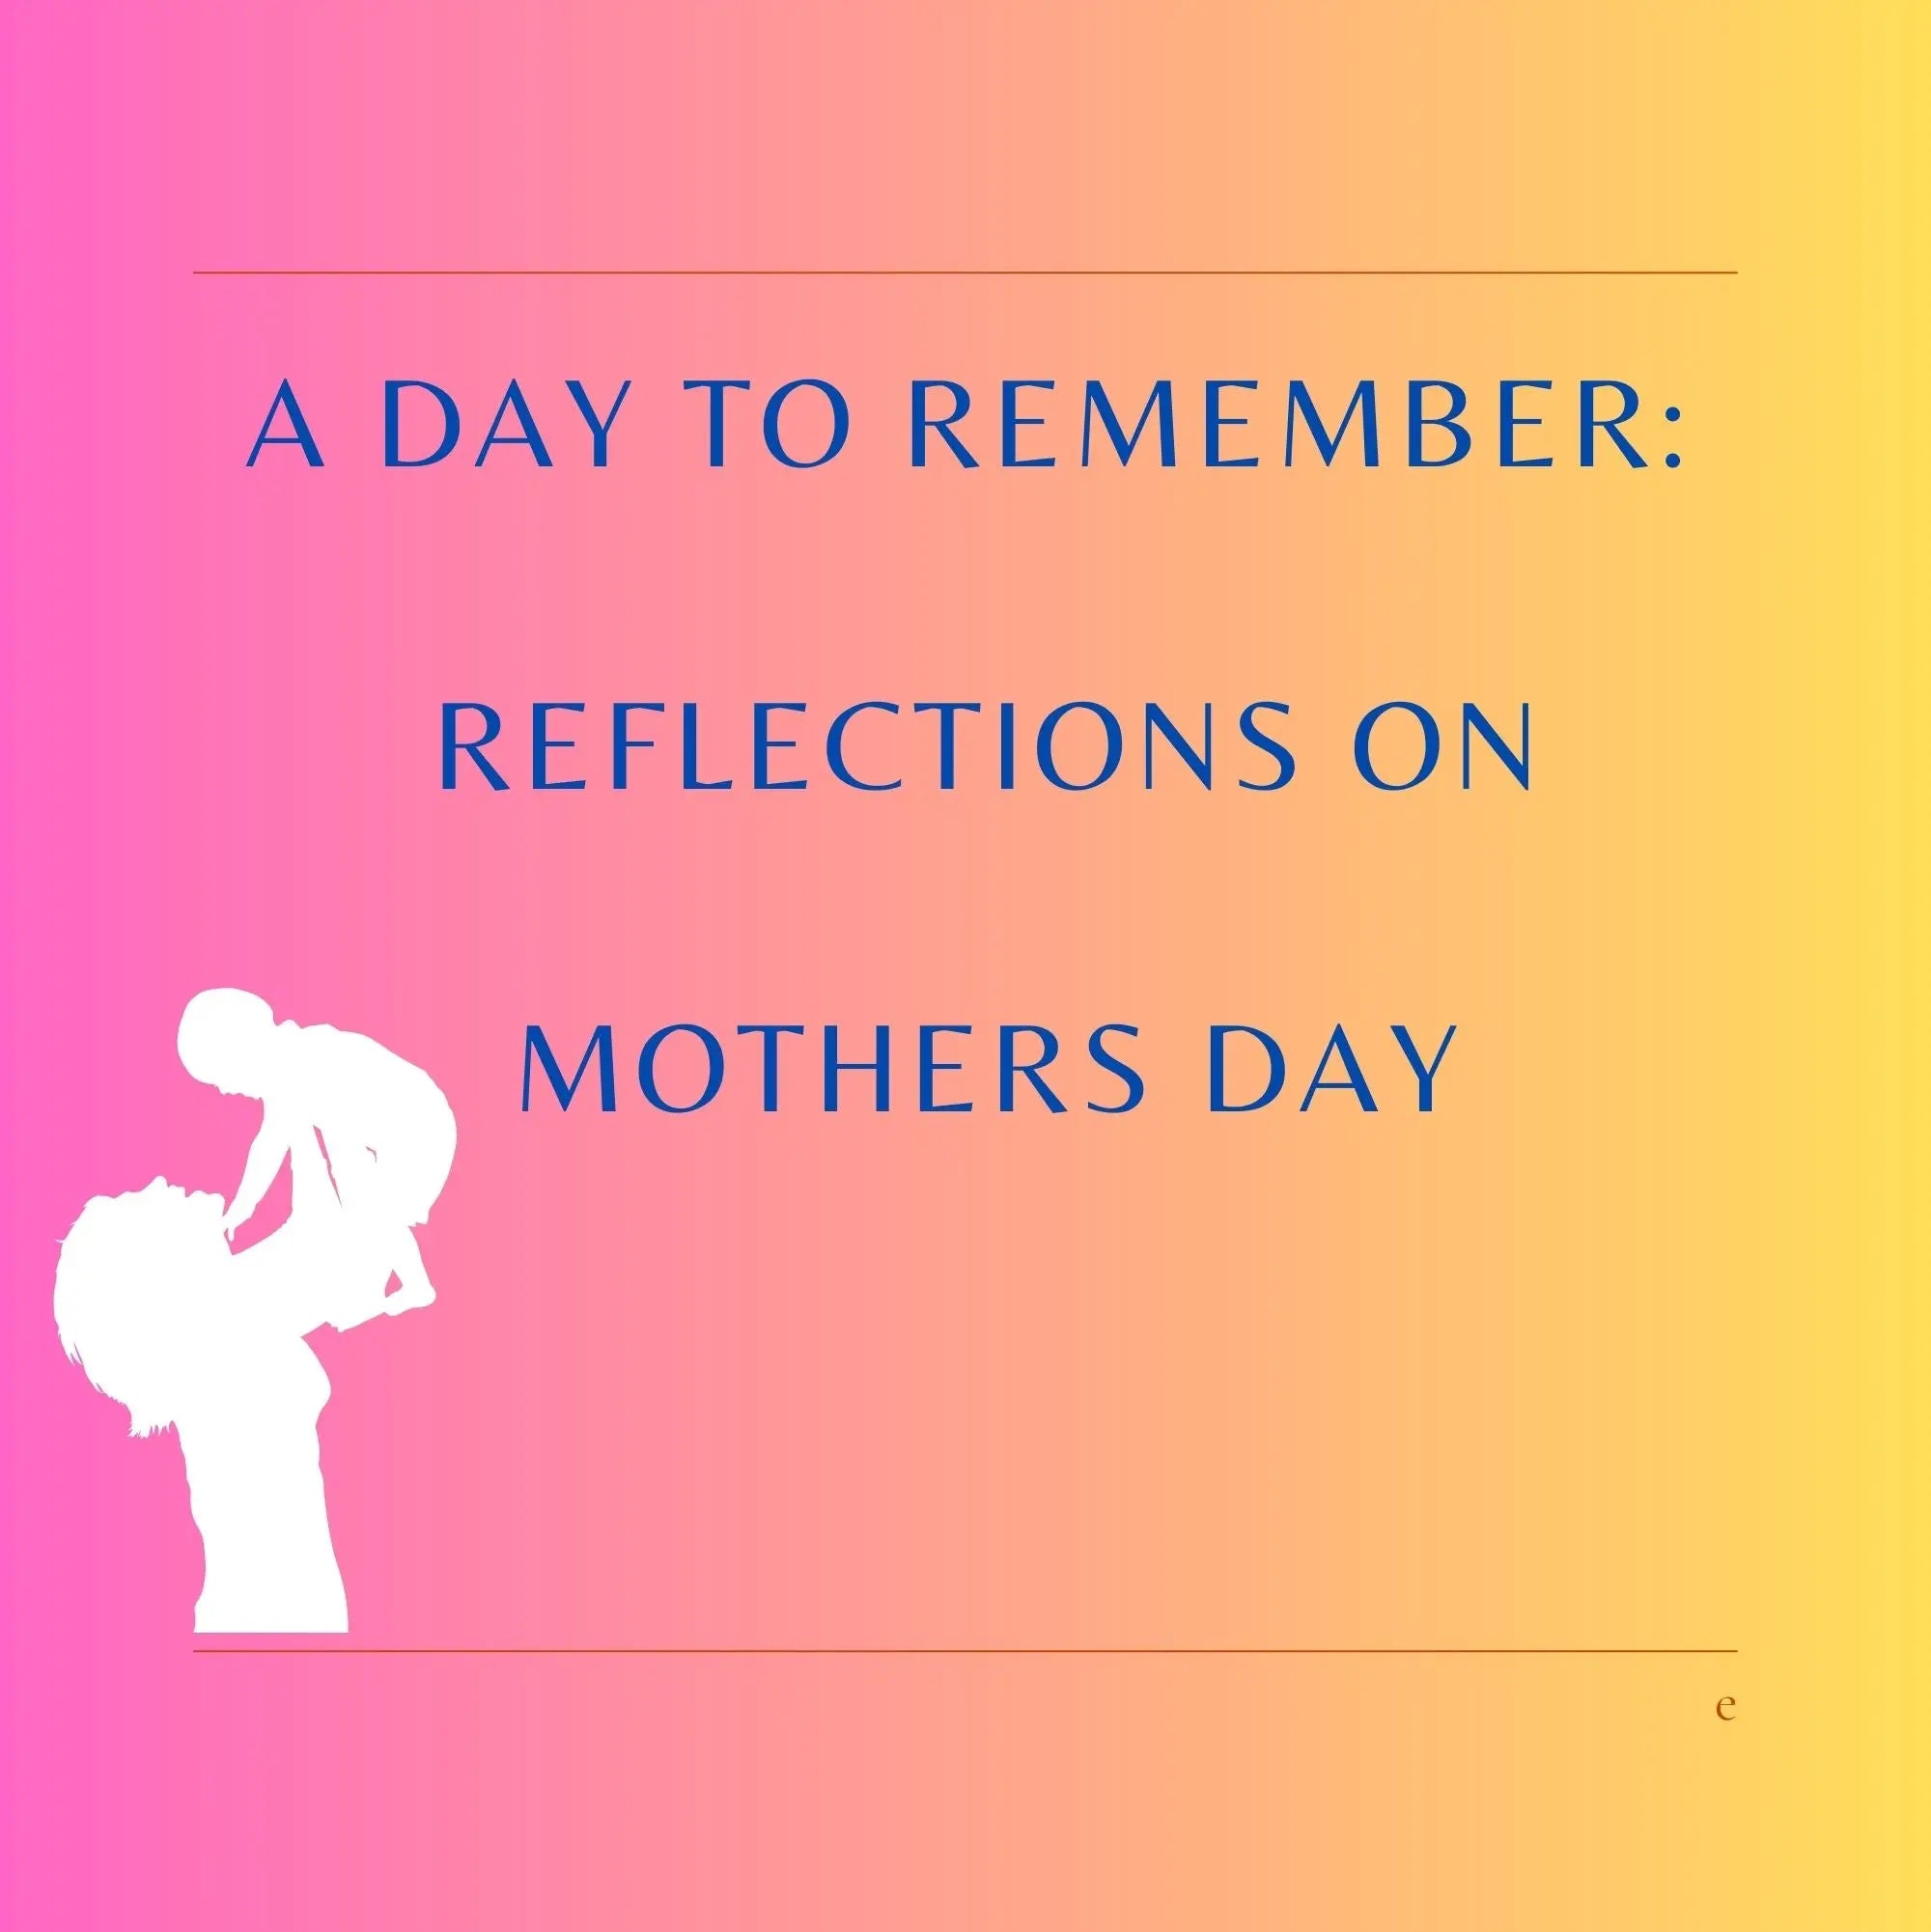 A Day To Remember: Reflections On mothers Day